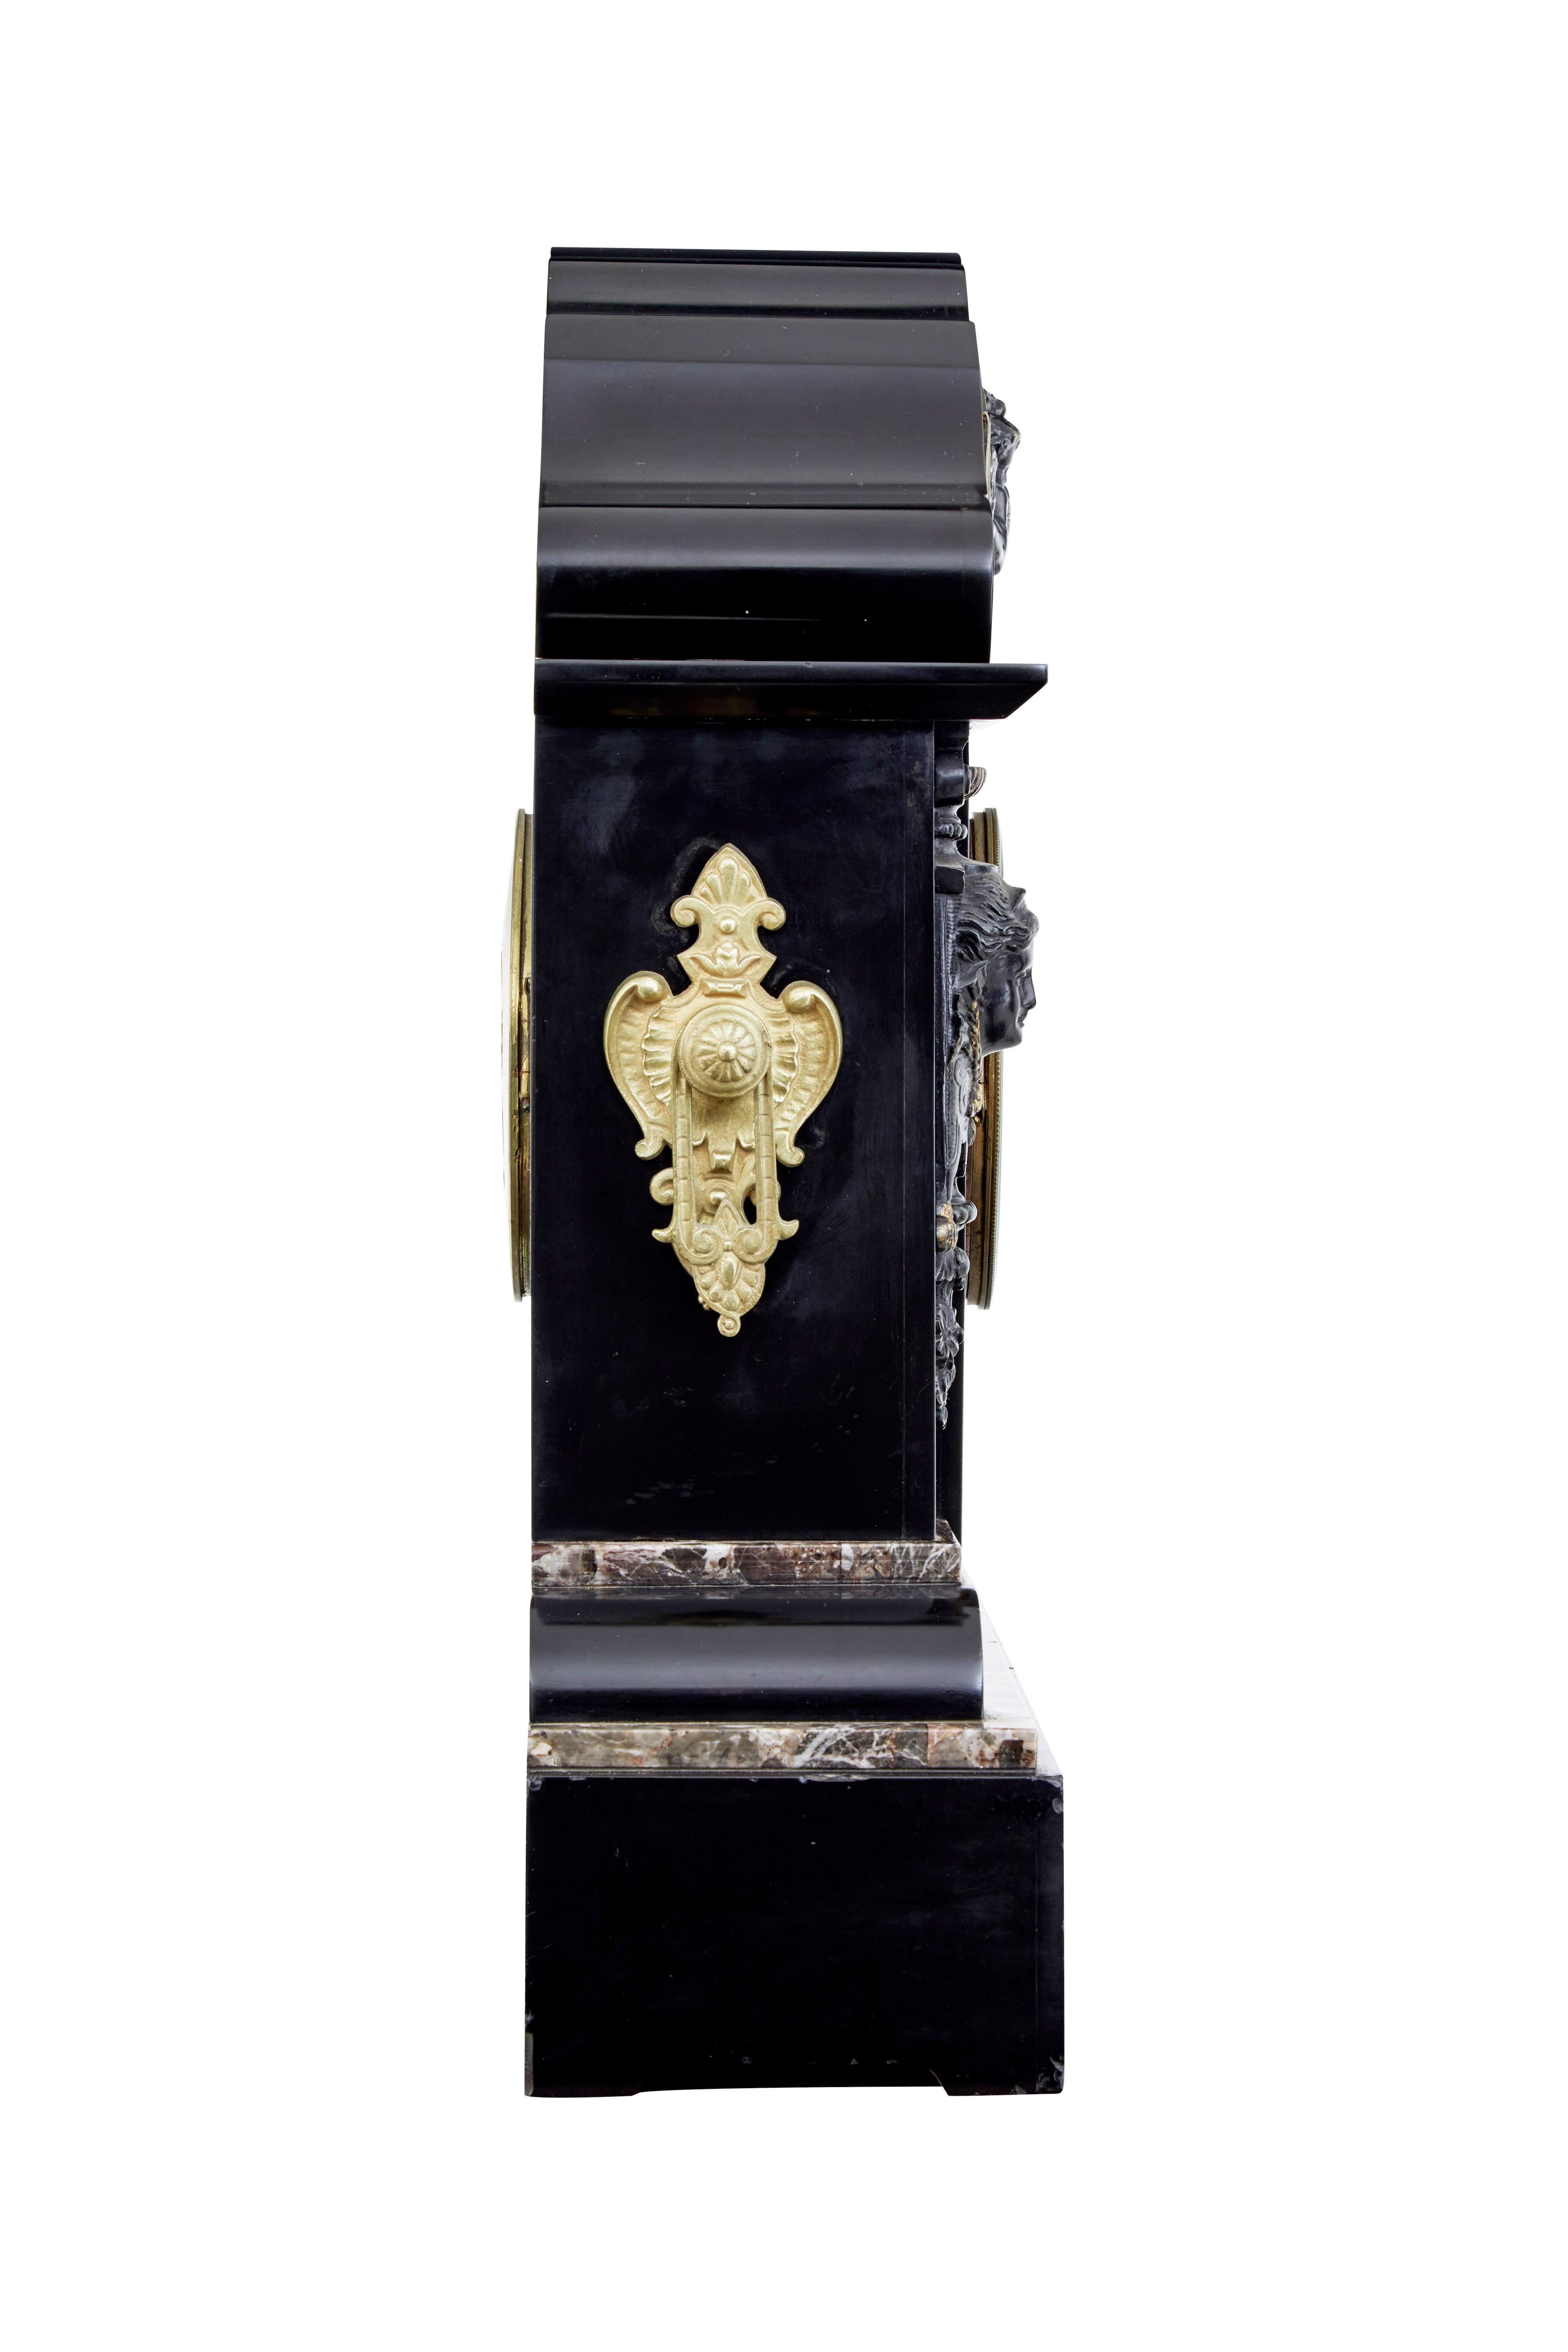 High victorian inlaid black marble mantel clock circa 1870.

Fine quality mantel clock of large proportions from the period in Victorias reign when it was in vogue to commemorate the death of Prince Albert.  Shaped architectural top with carved